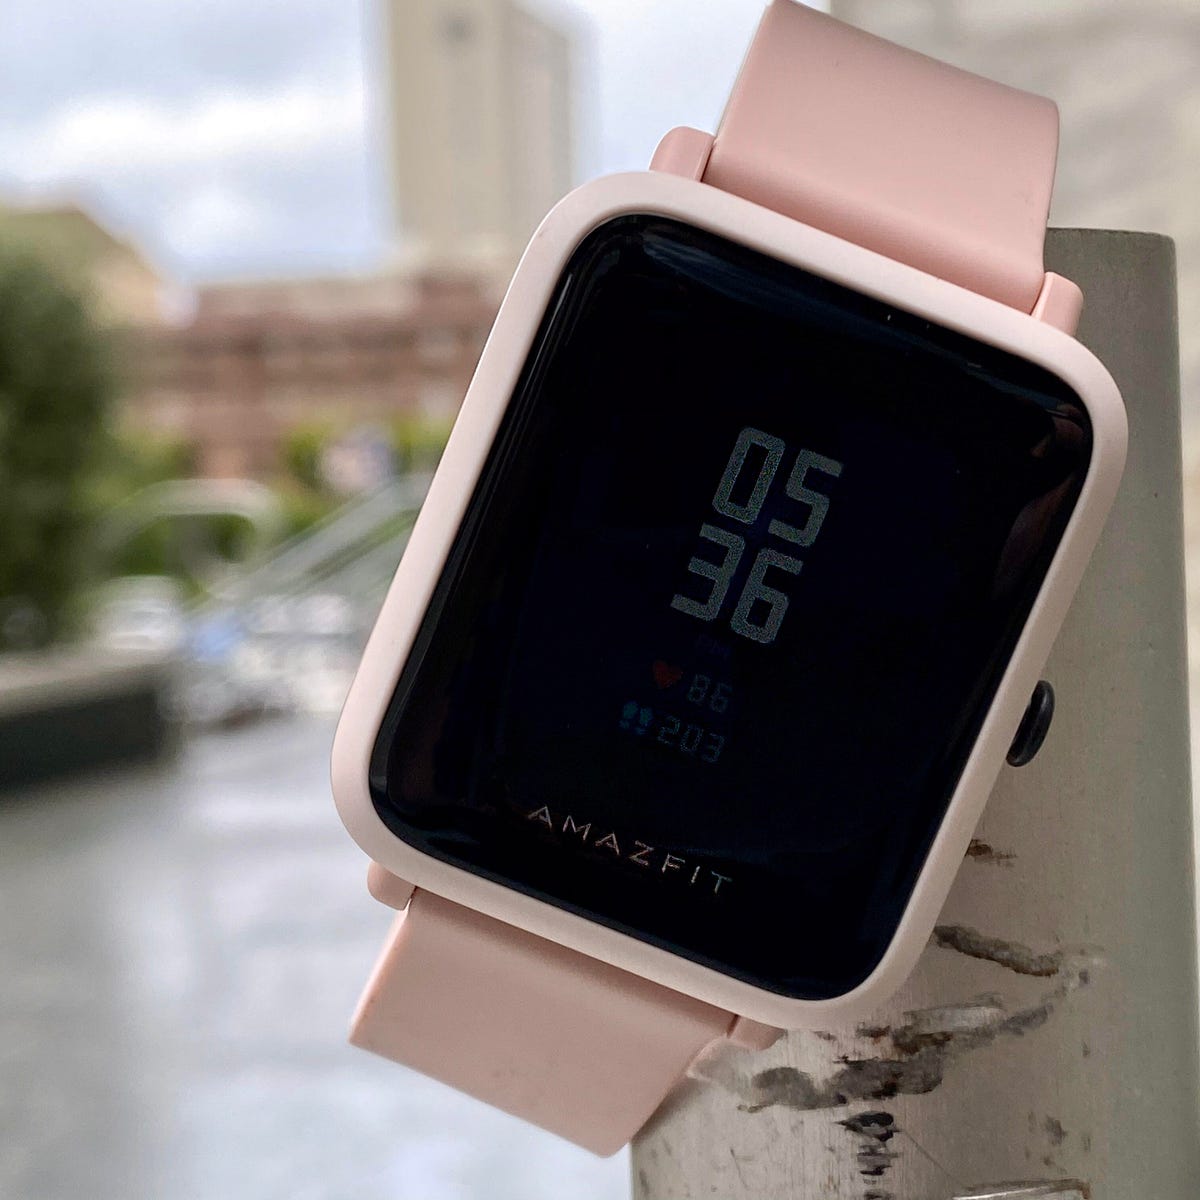 Amazfit Bip S smartwatch review: Price and battery life will smoke the  competition - CNET